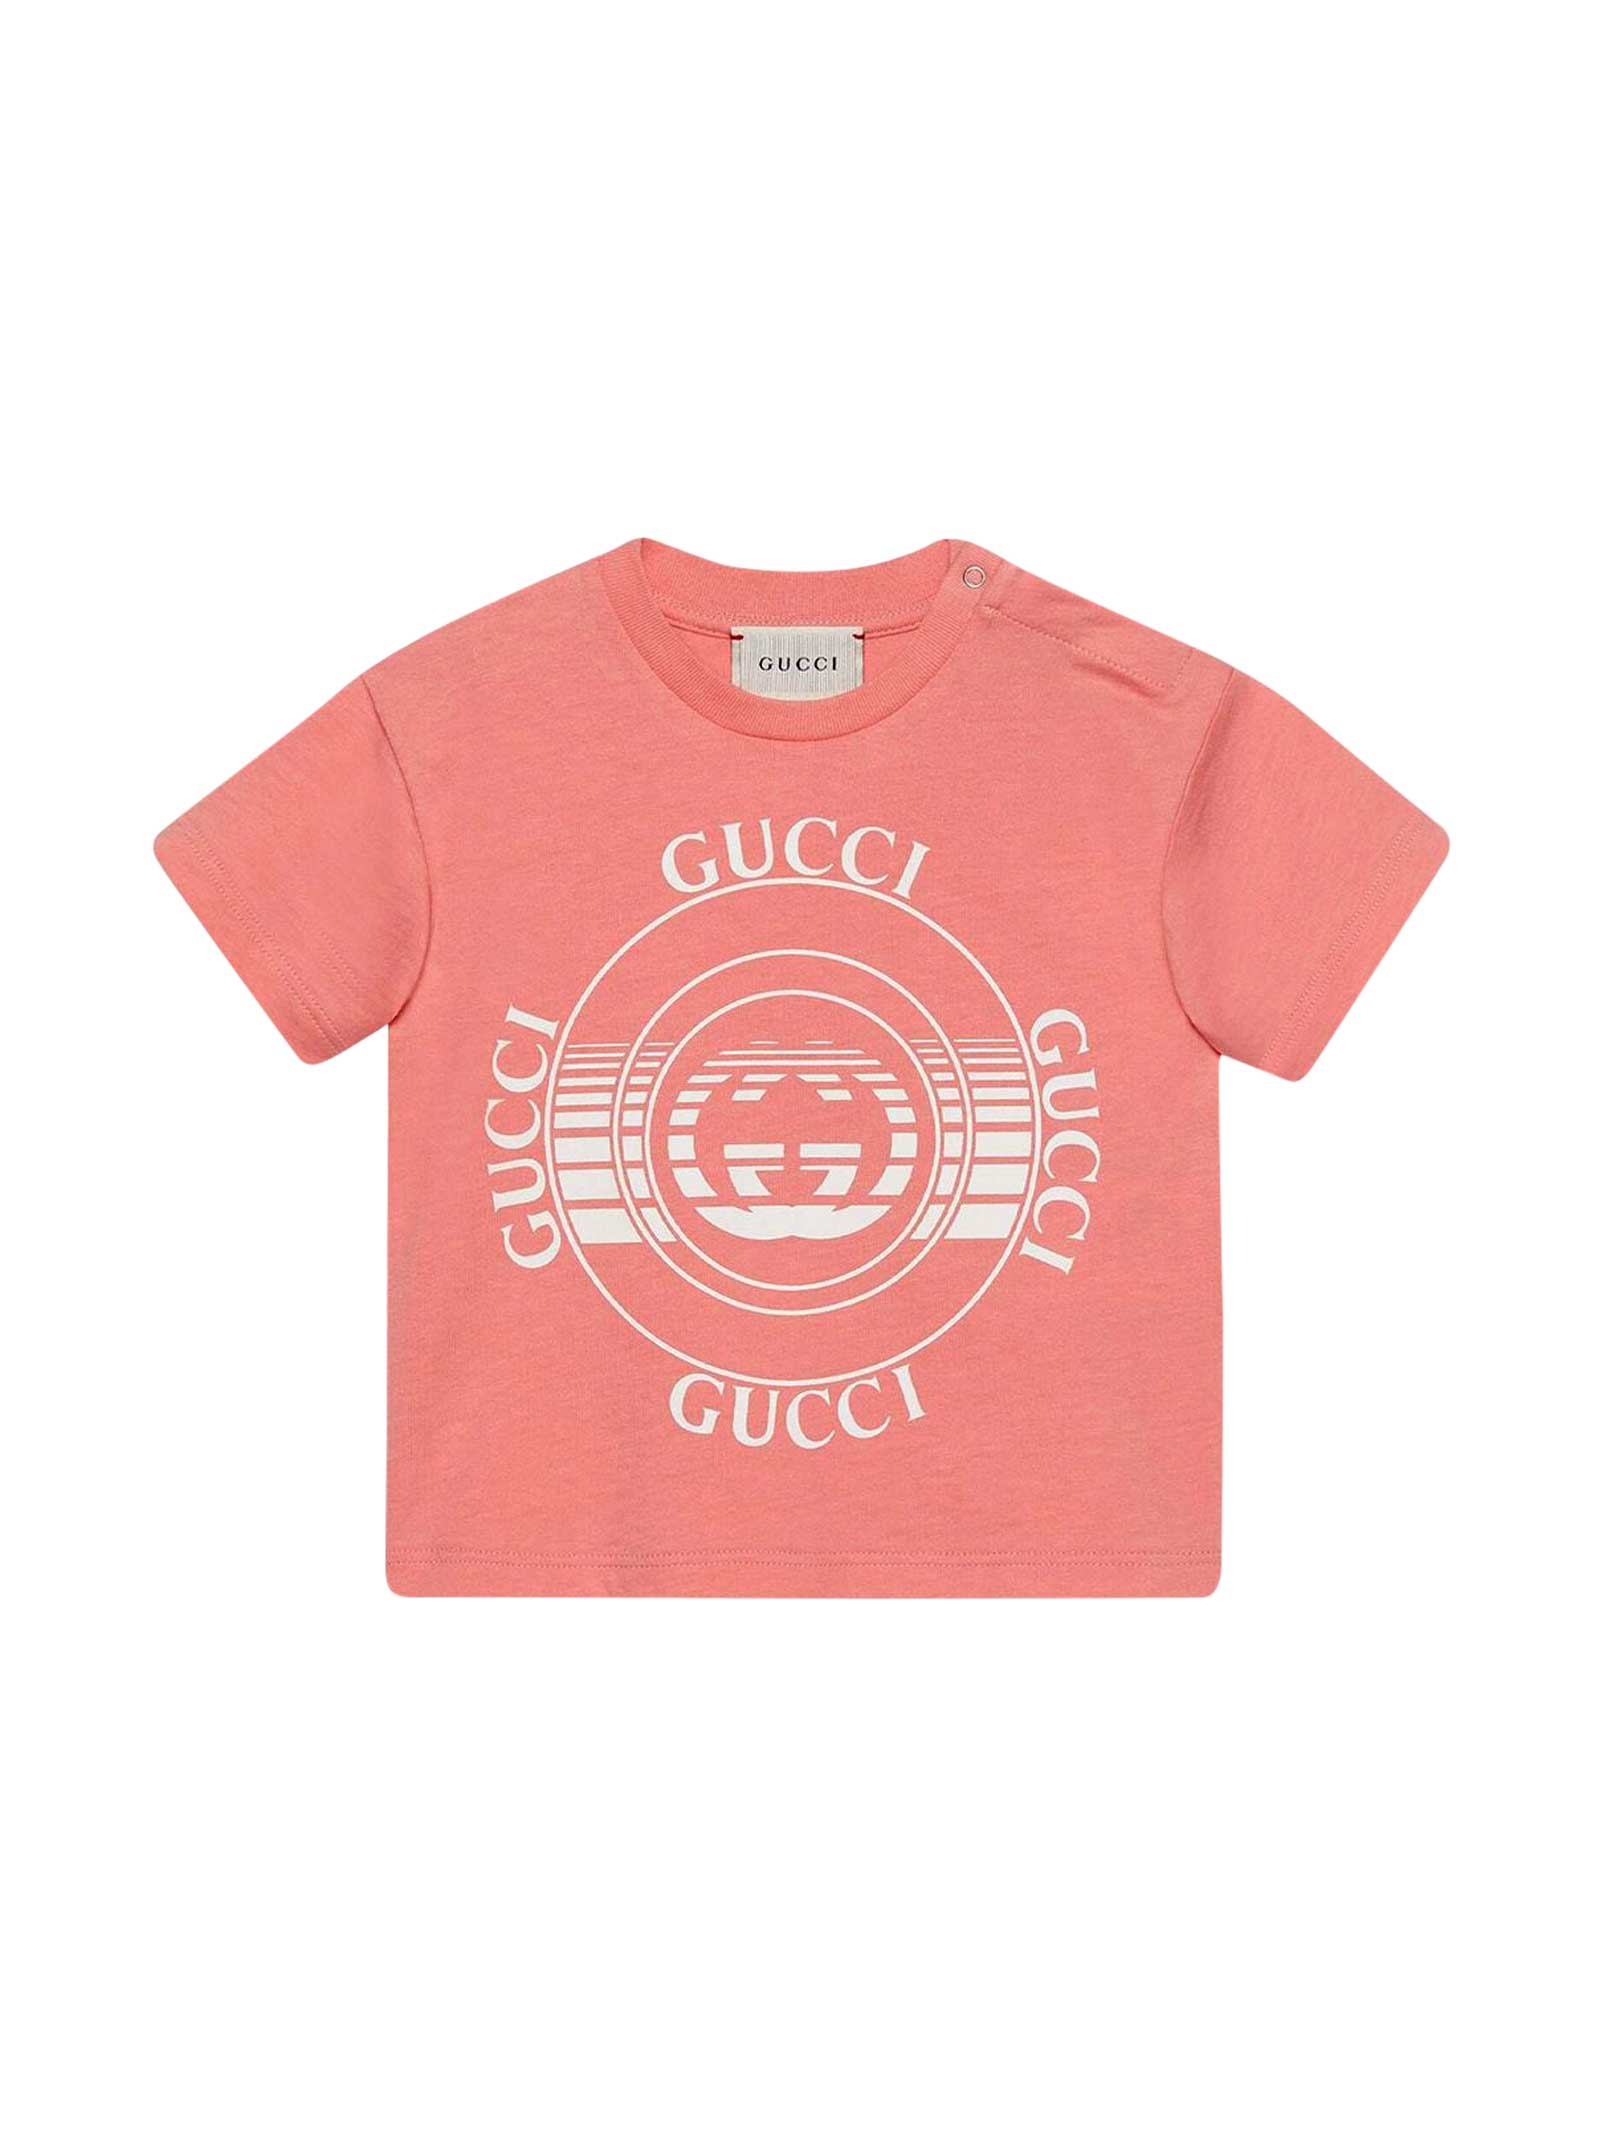 Gucci Pink T-shirt With White Print